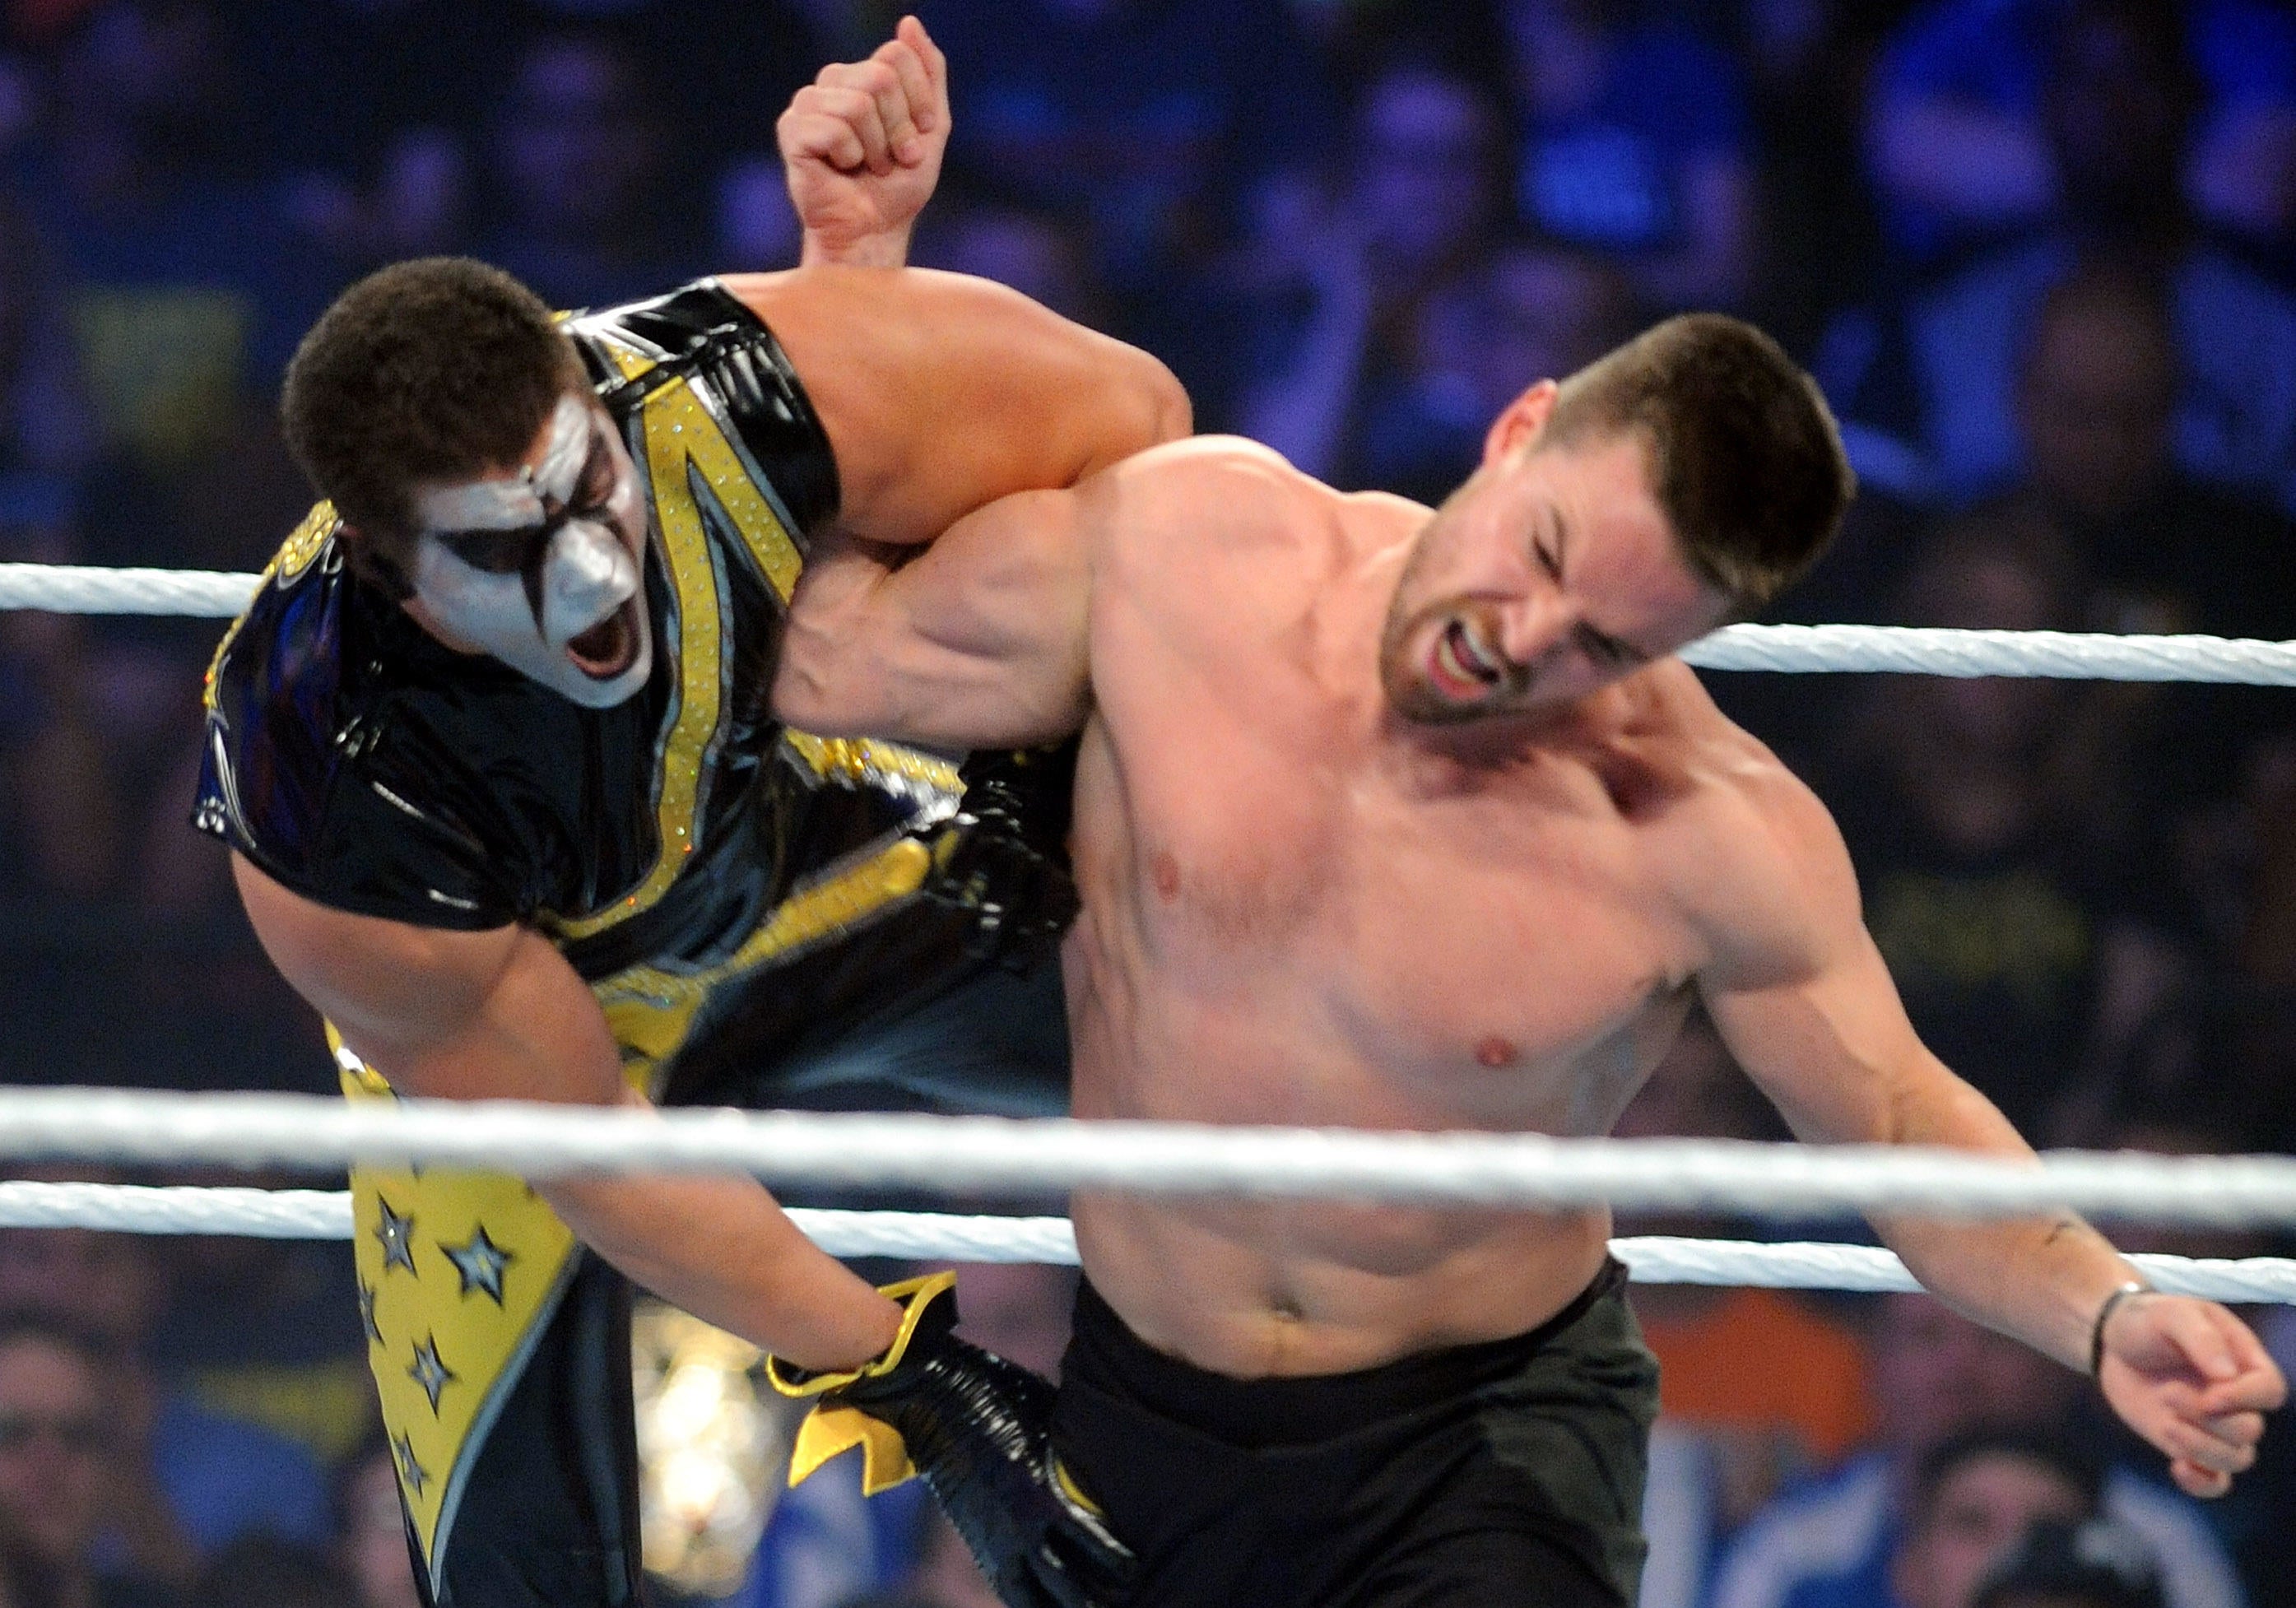 Stephen Amell tosses Stardust during his tag team match with Neville against Stardust and King Barrett at WWE SummerSlam at the Barclays Center on August 23, 2015 in Brooklyn, New York.